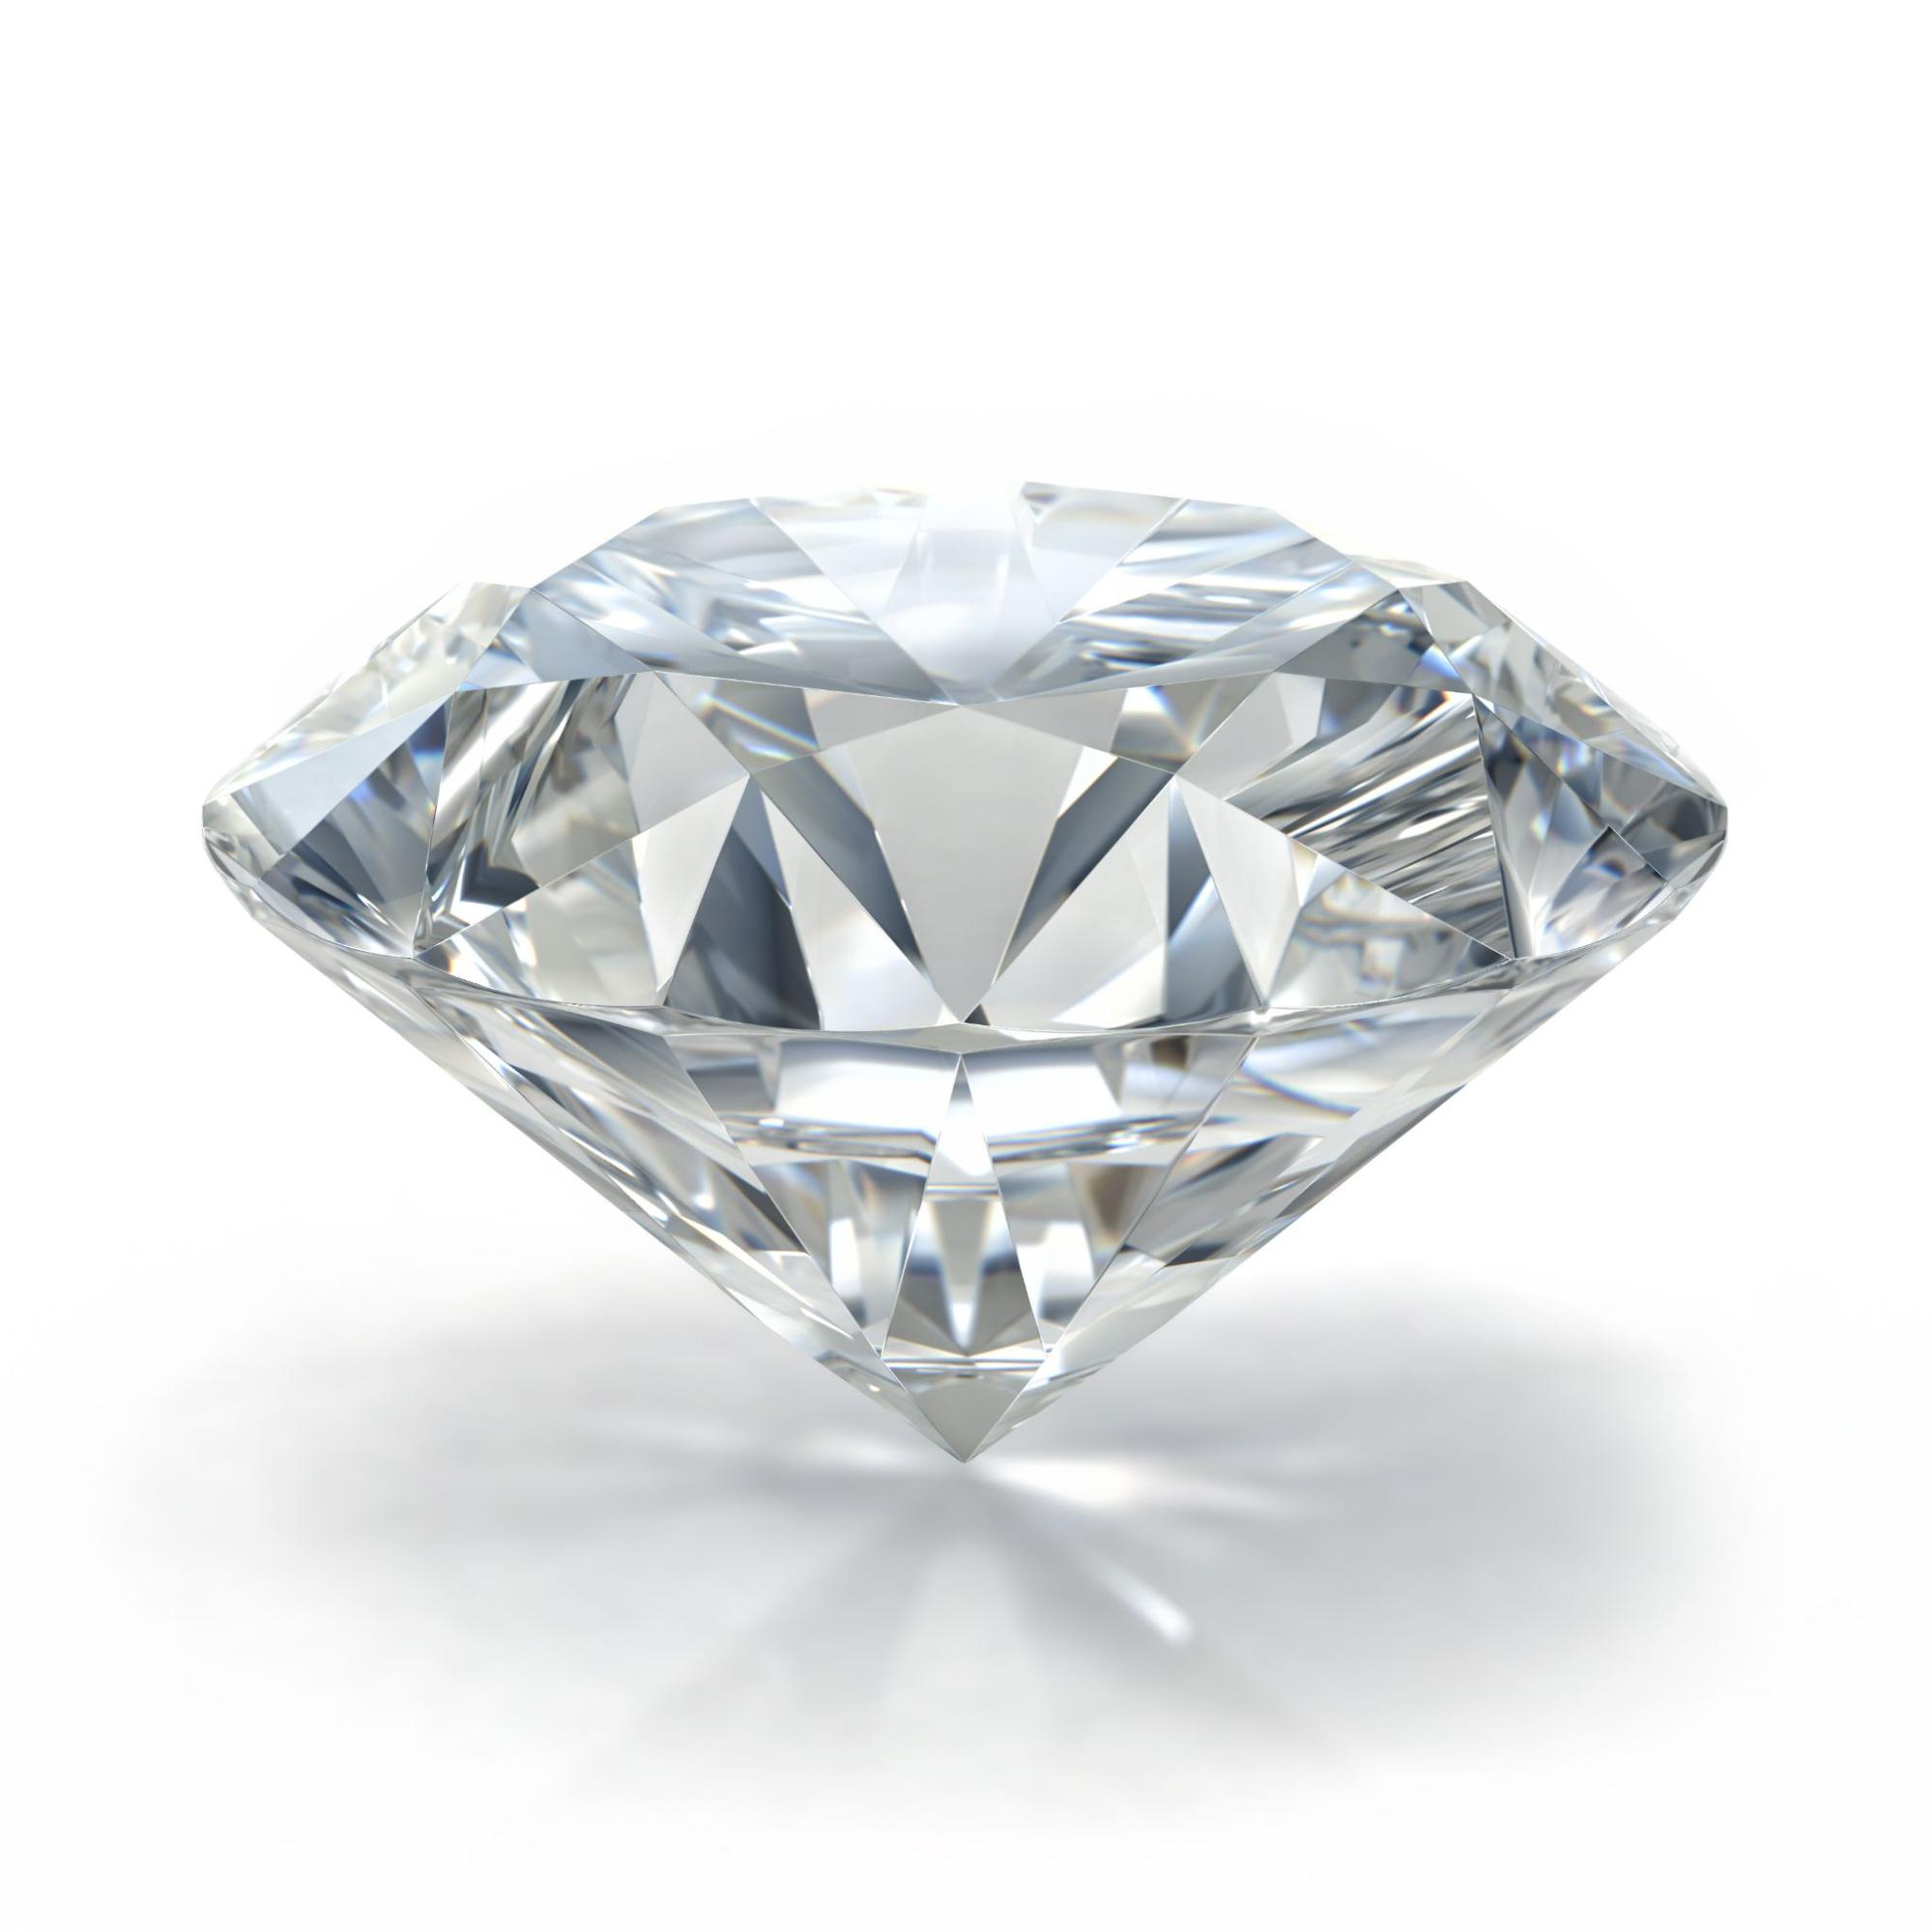 A large diamond sits alone against a white background, demonstrating excellent diamond quality.